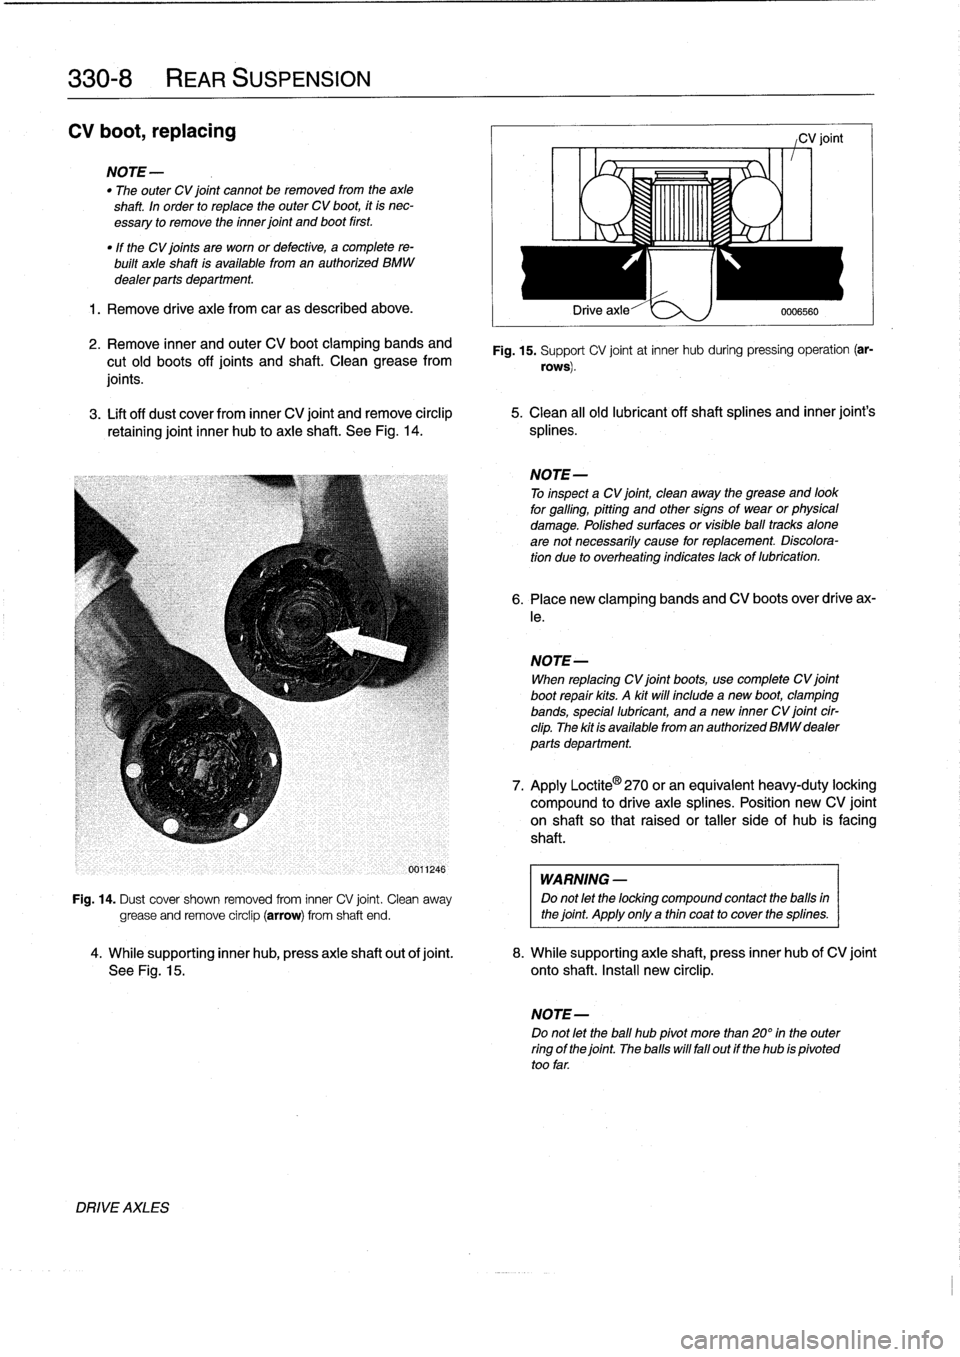 BMW 325i 1994 E36 Workshop Manual 
330-
8

	

REAR
SUSPENSION

CV
boot,
replacing

NOTE-

"
The
outer
CV
joint
cannot
be
removed
from
the
axle
shaft
.
In
order
to
replace
the
outer
CV
boot,
it
is
nec-
essary
to
remove
the
inner
joint
